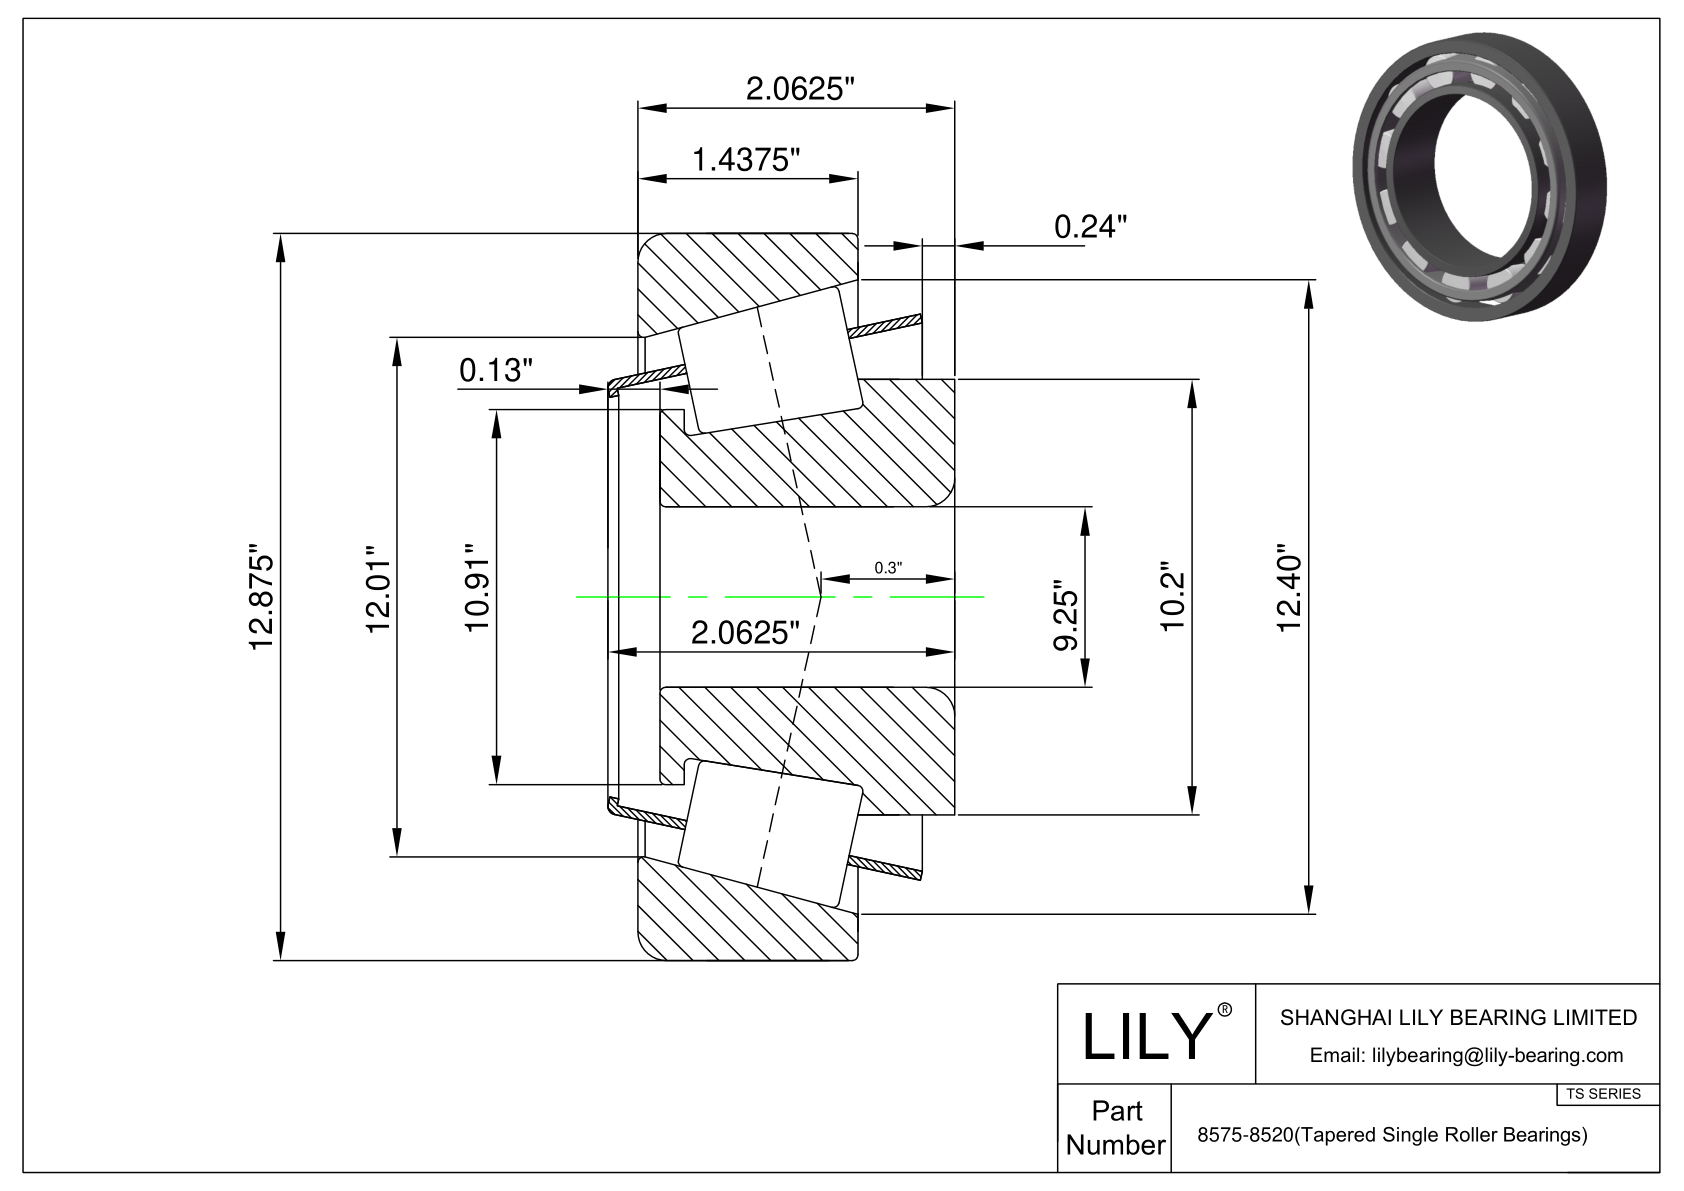 8575-8520 TS (Tapered Single Roller Bearings) (Imperial) cad drawing